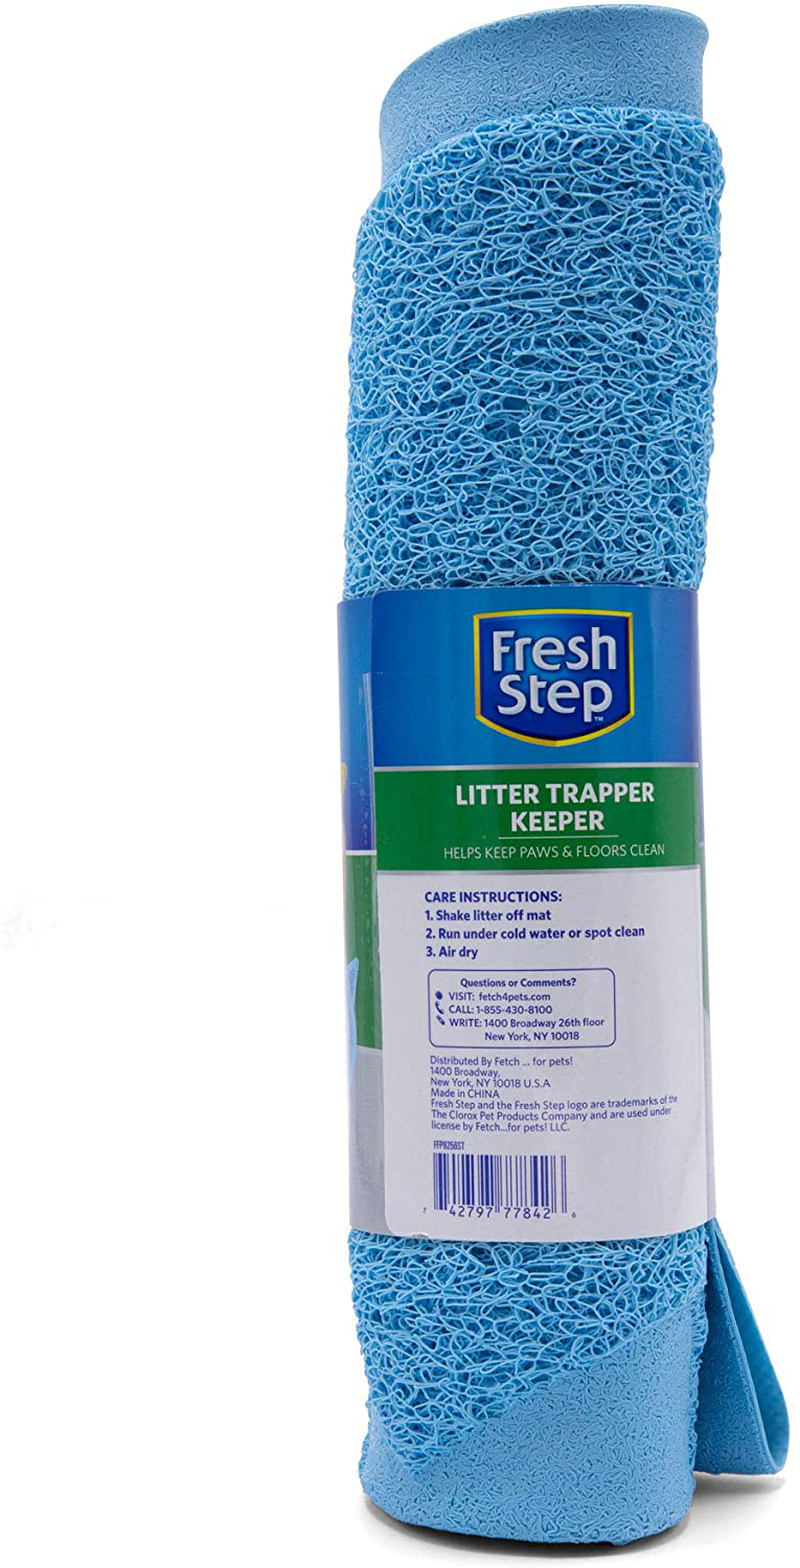 Fresh Step Recycled Plastic Litter Box and Cleanup Products for Cats - Cat Litter Scoops, Cat Litter Box, Pet Cat Litter Accessories - Kitty Litter Scooper, Cat Box, Litter Mat, and Cat Supplies Animals & Pet Supplies > Pet Supplies > Cat Supplies > Cat Litter Box Mats Fresh Step   